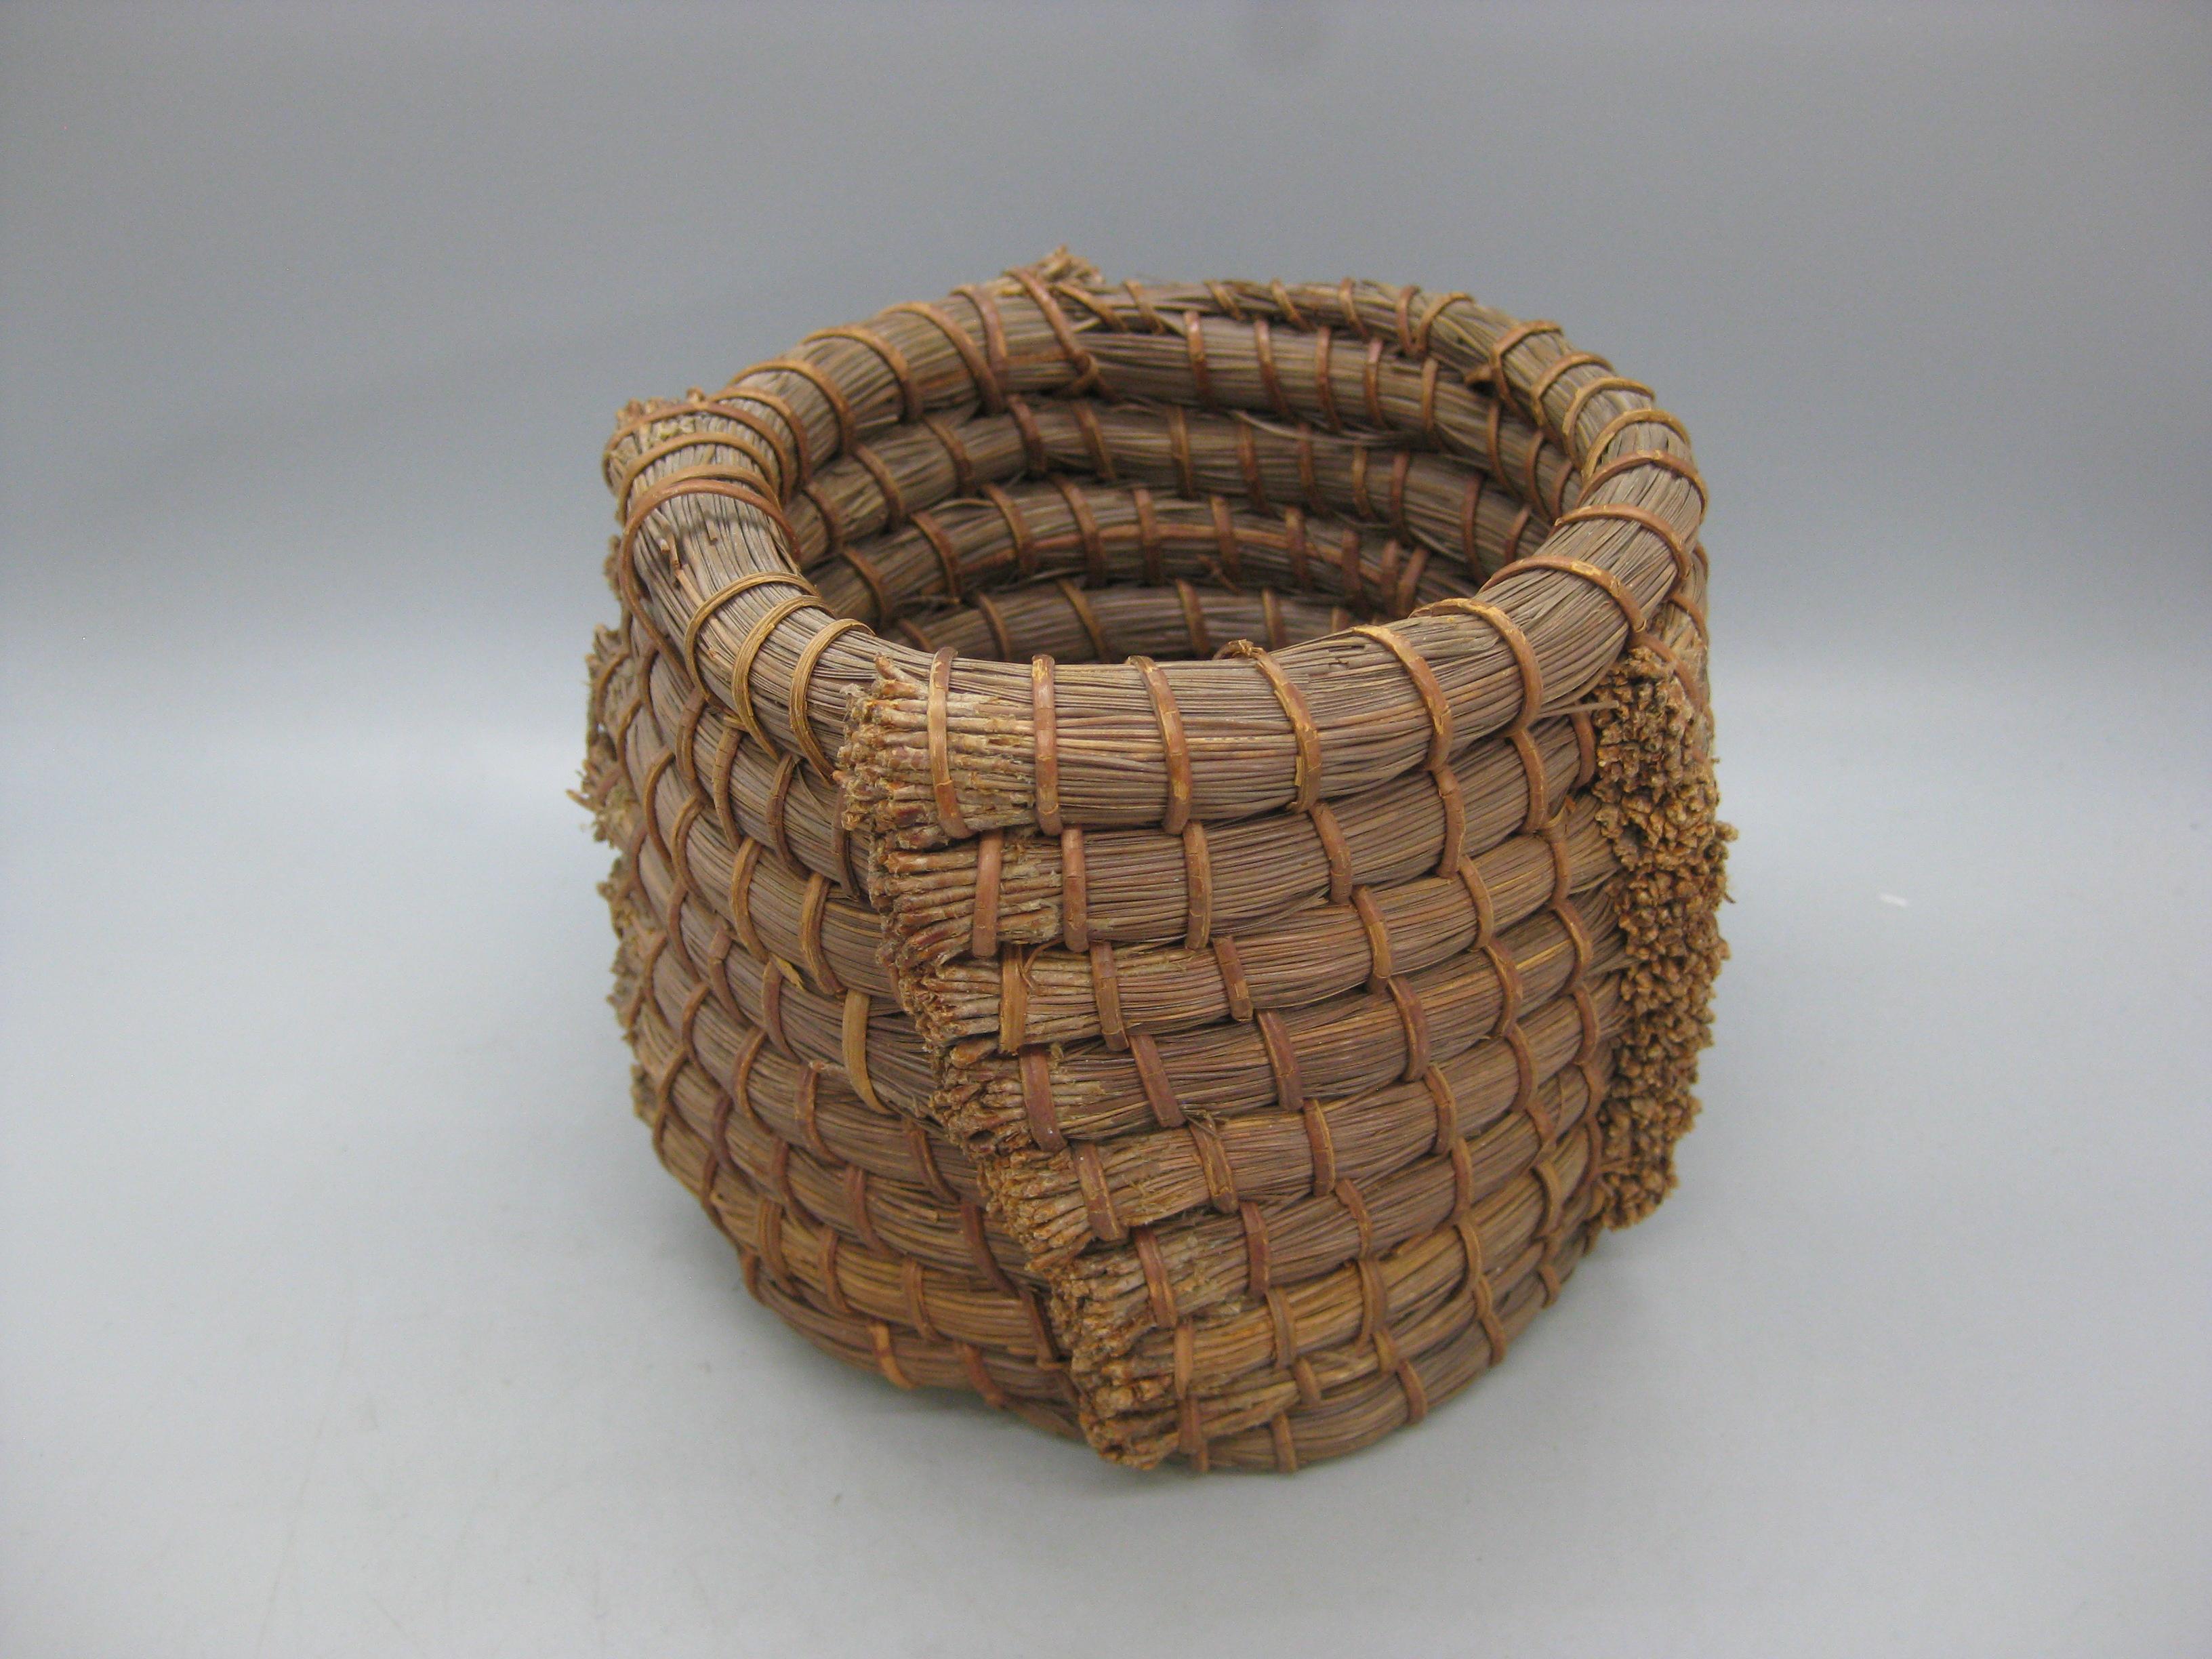 Wonderful antique hand made Papago Native American Indian pine needle coil basket. Great form and design. In excellent original condition. Tightly woven and color is great. Measures: 3 3/4